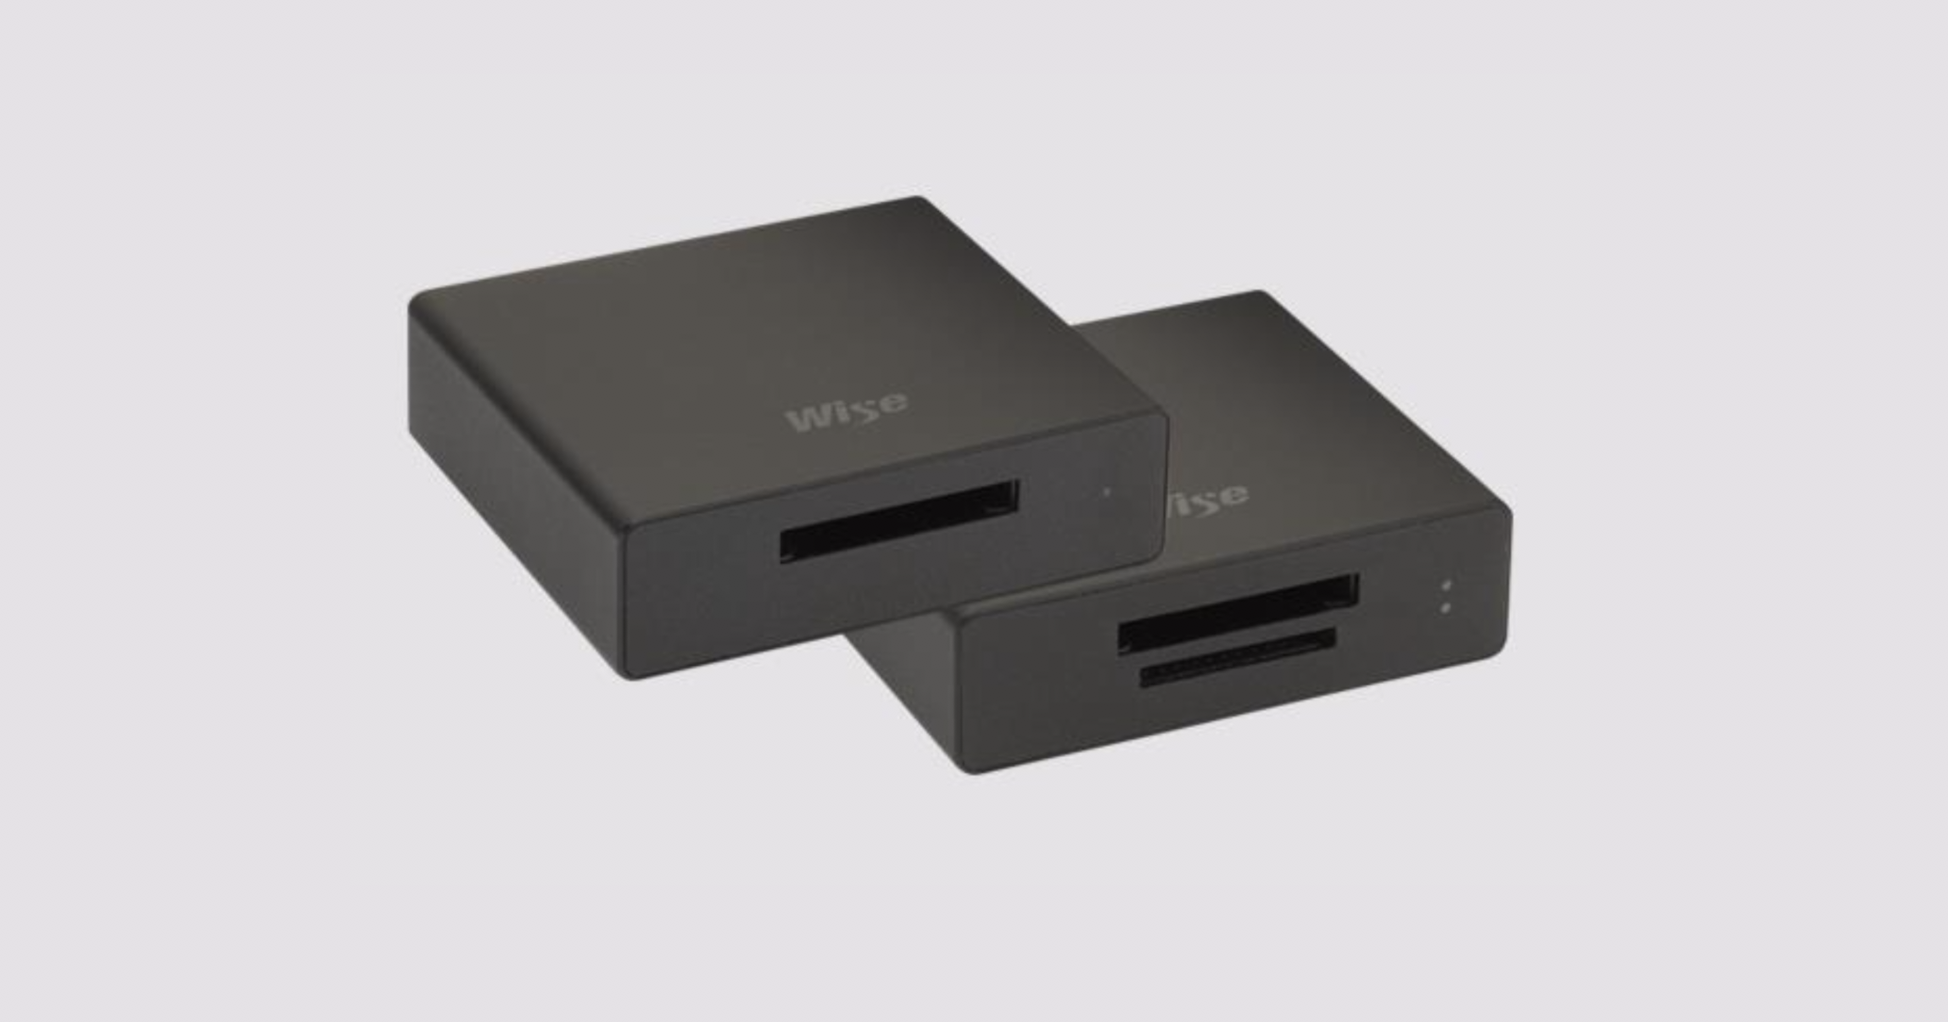 New Wise Advanced CFexpress Type B & CFexpress Type B / SD card readers